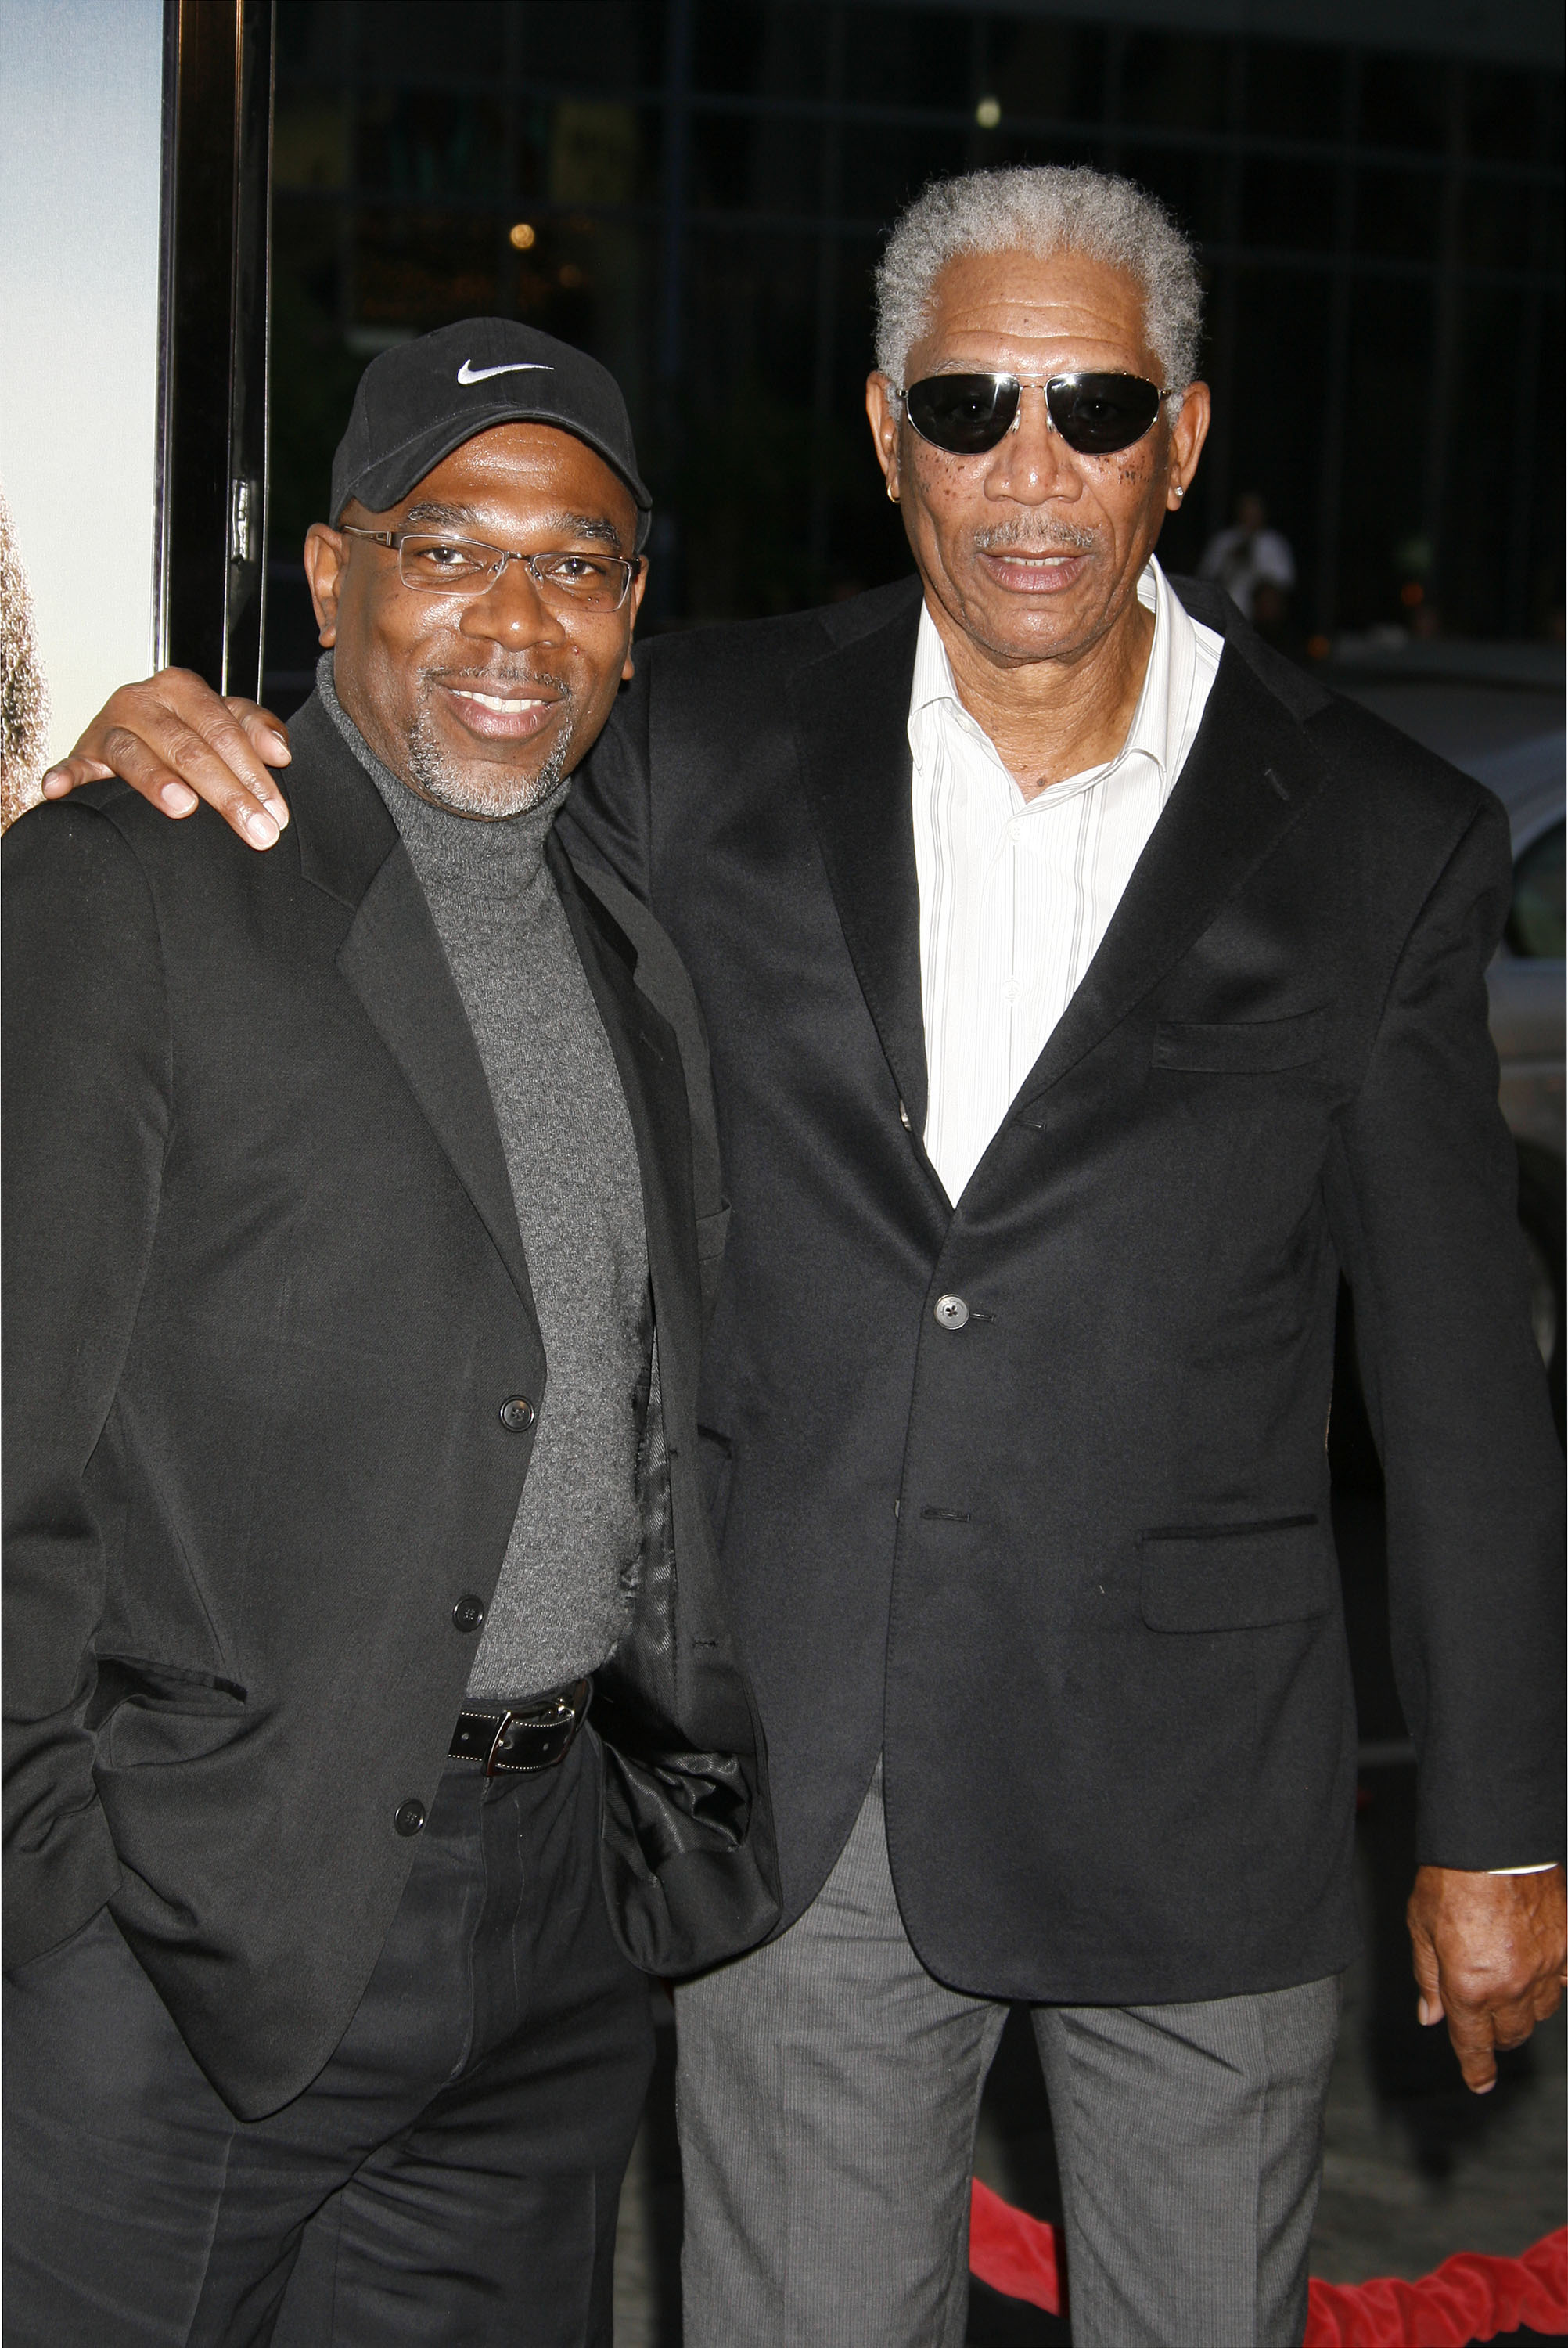 Morgan Freeman and son Alfonso at the premiere of "The Bucket List," 2007 | Source: Getty Images